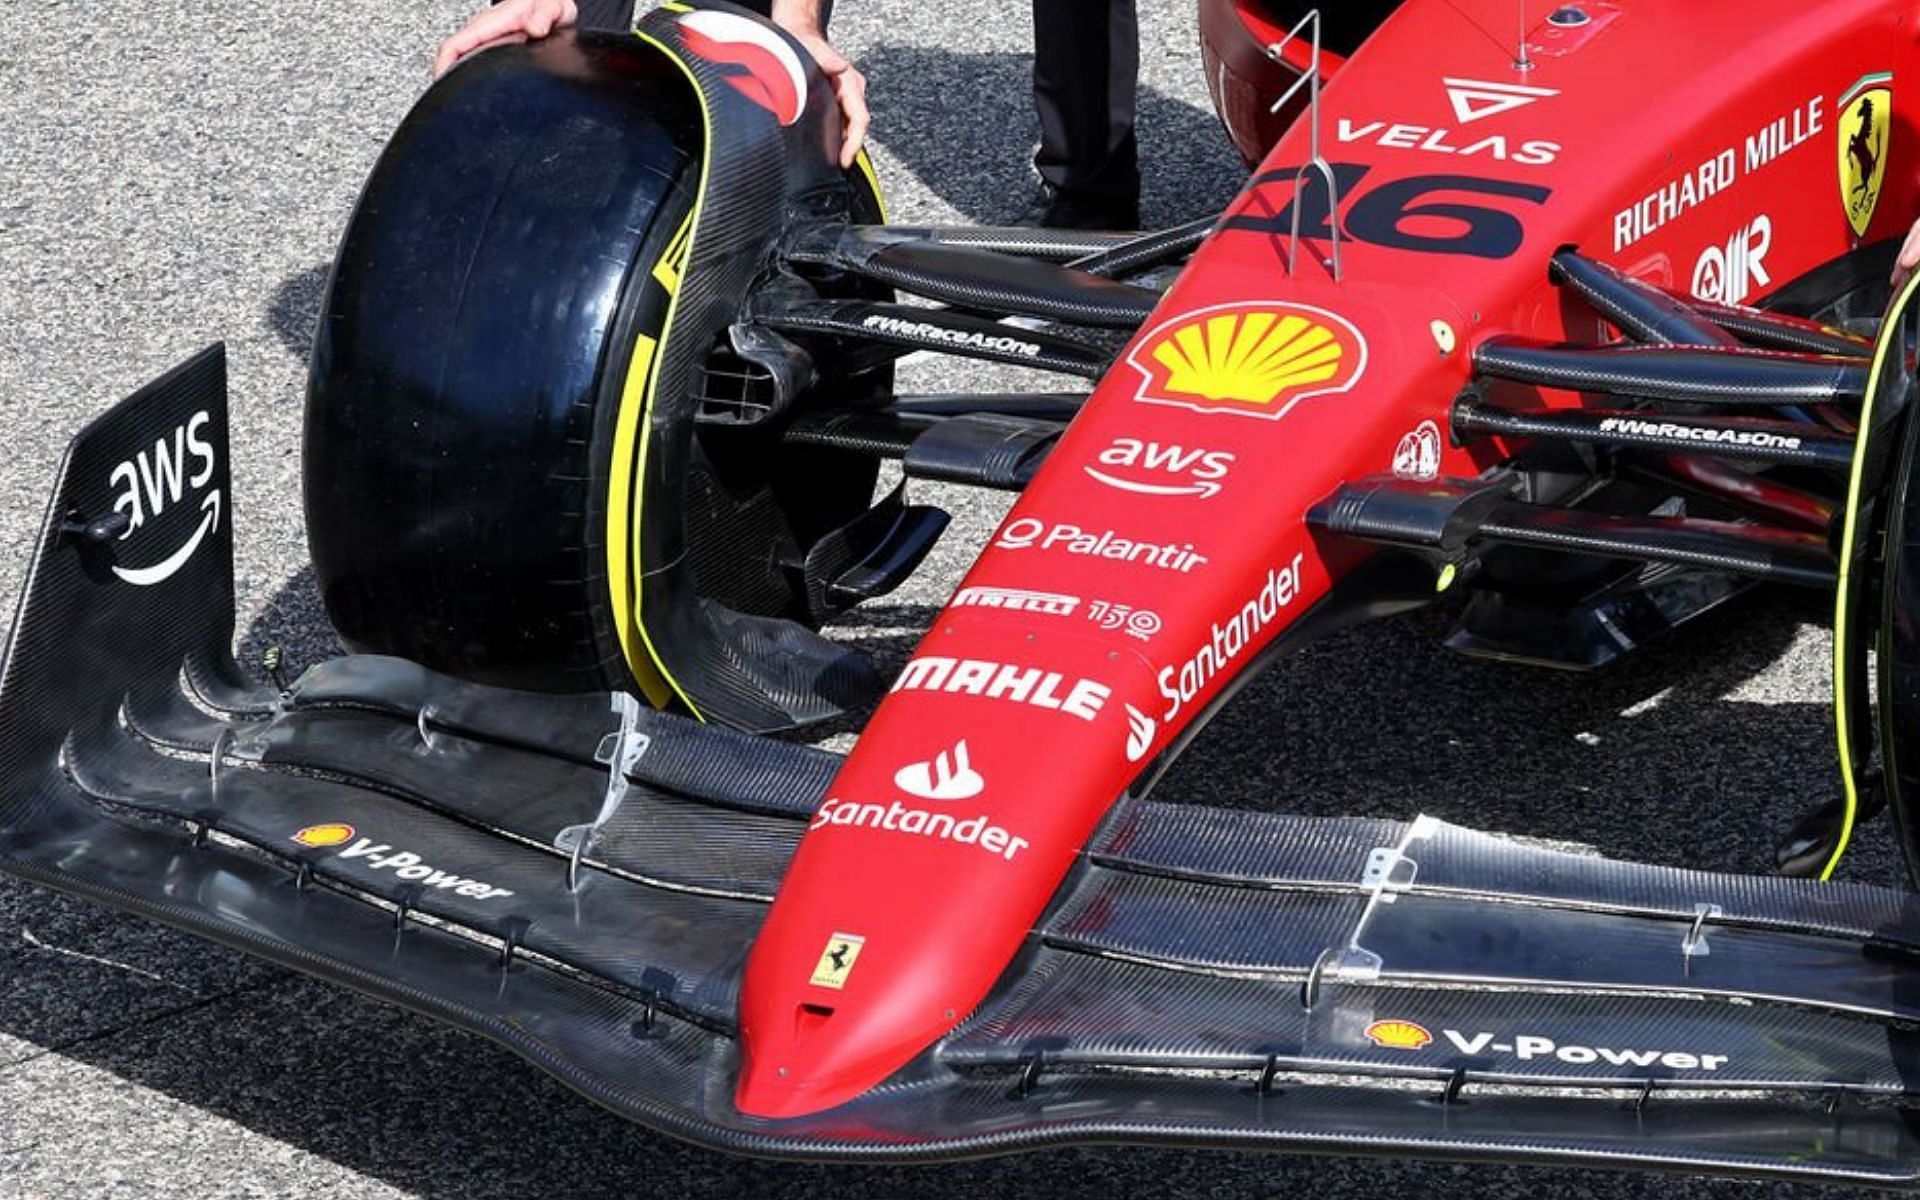 The carbon fiber front wing of the Ferrari F1-75, like most cars on the grid this season, is left exposed rather than being painted.